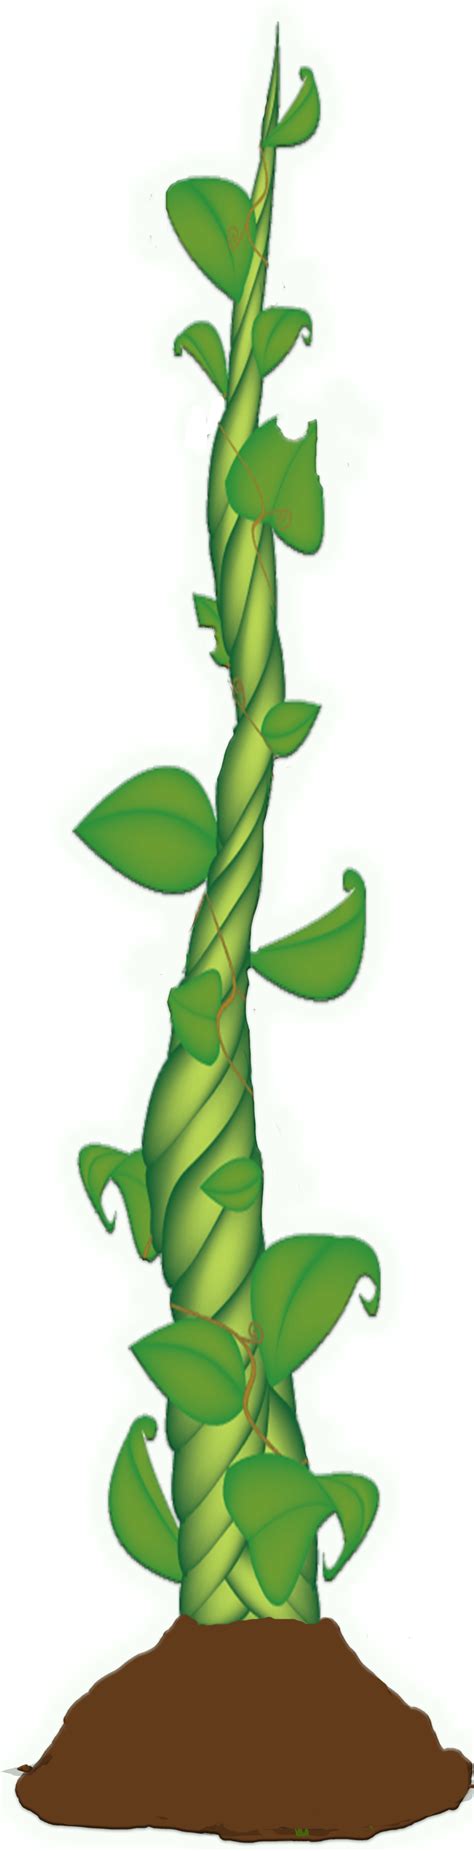 Clipart Leaves Beanstalk Beanstalk Clipart Png Download Full Size